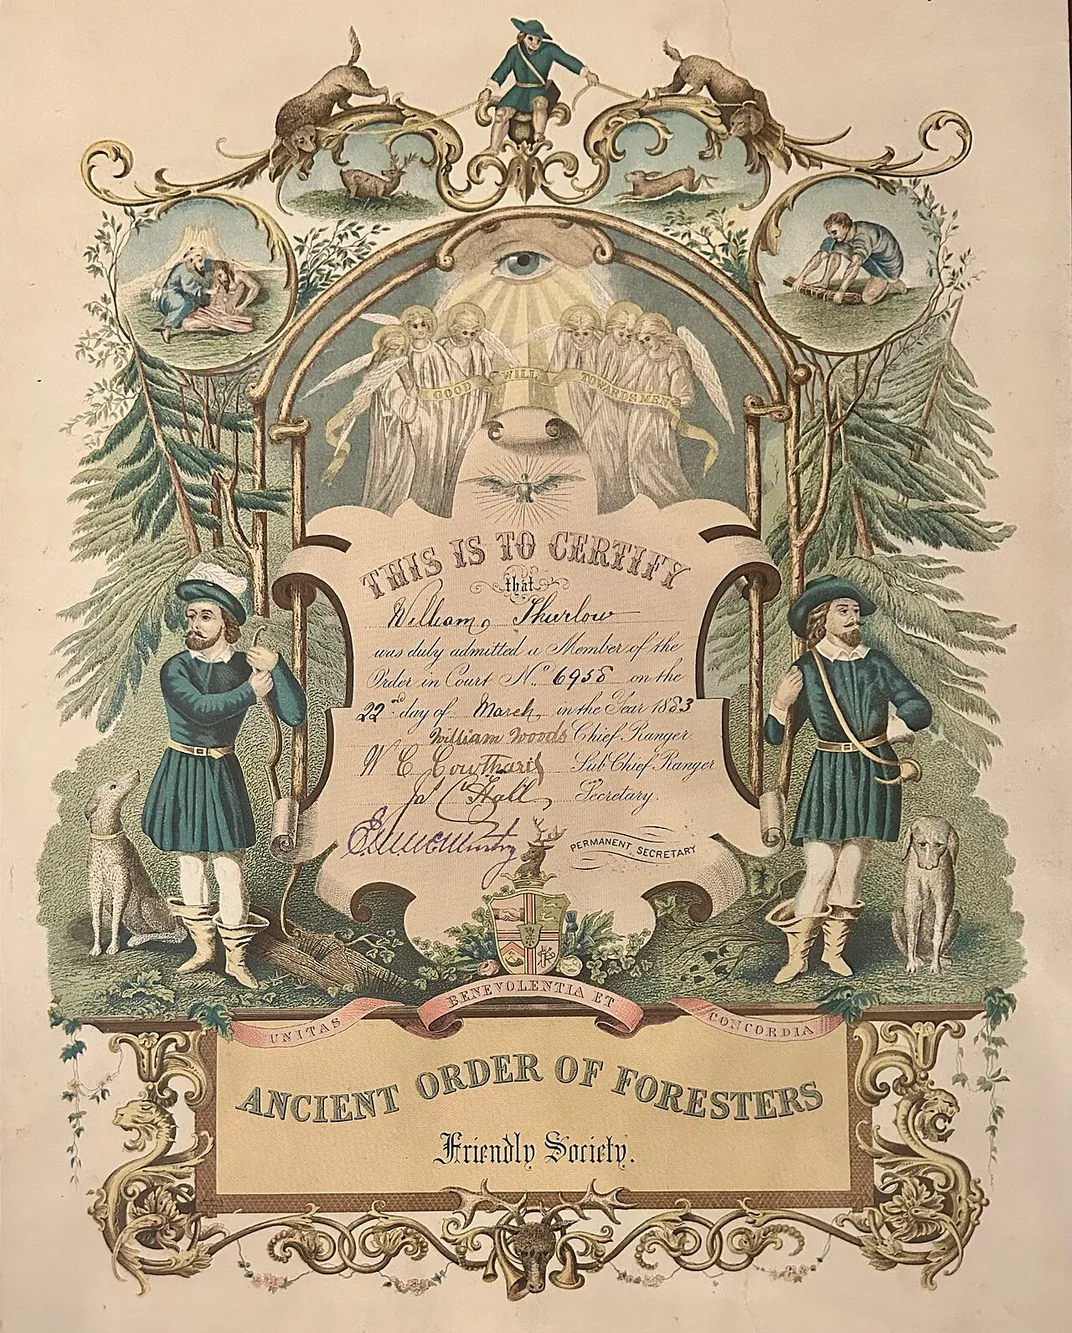 An 1883 membership certificate for the Ancient Order of Foresters